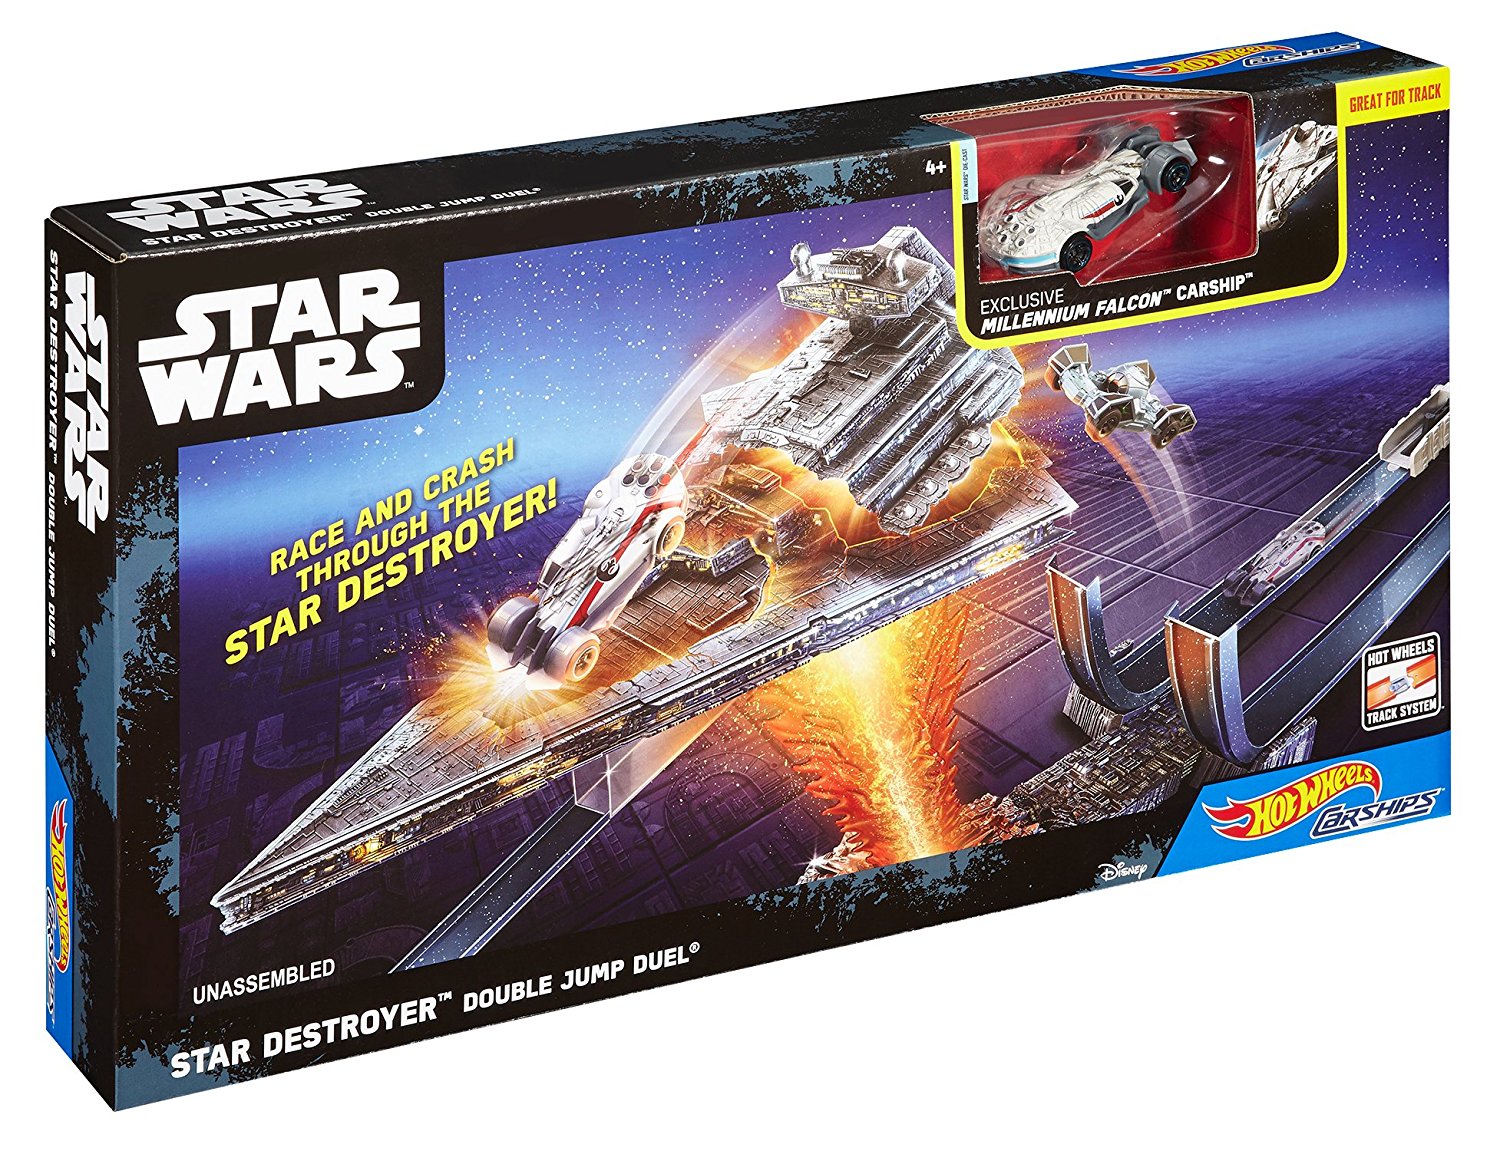 Hot Wheels Star Wars Carships Double Jump Star Destroyer Battle Playset – Just $8.58!